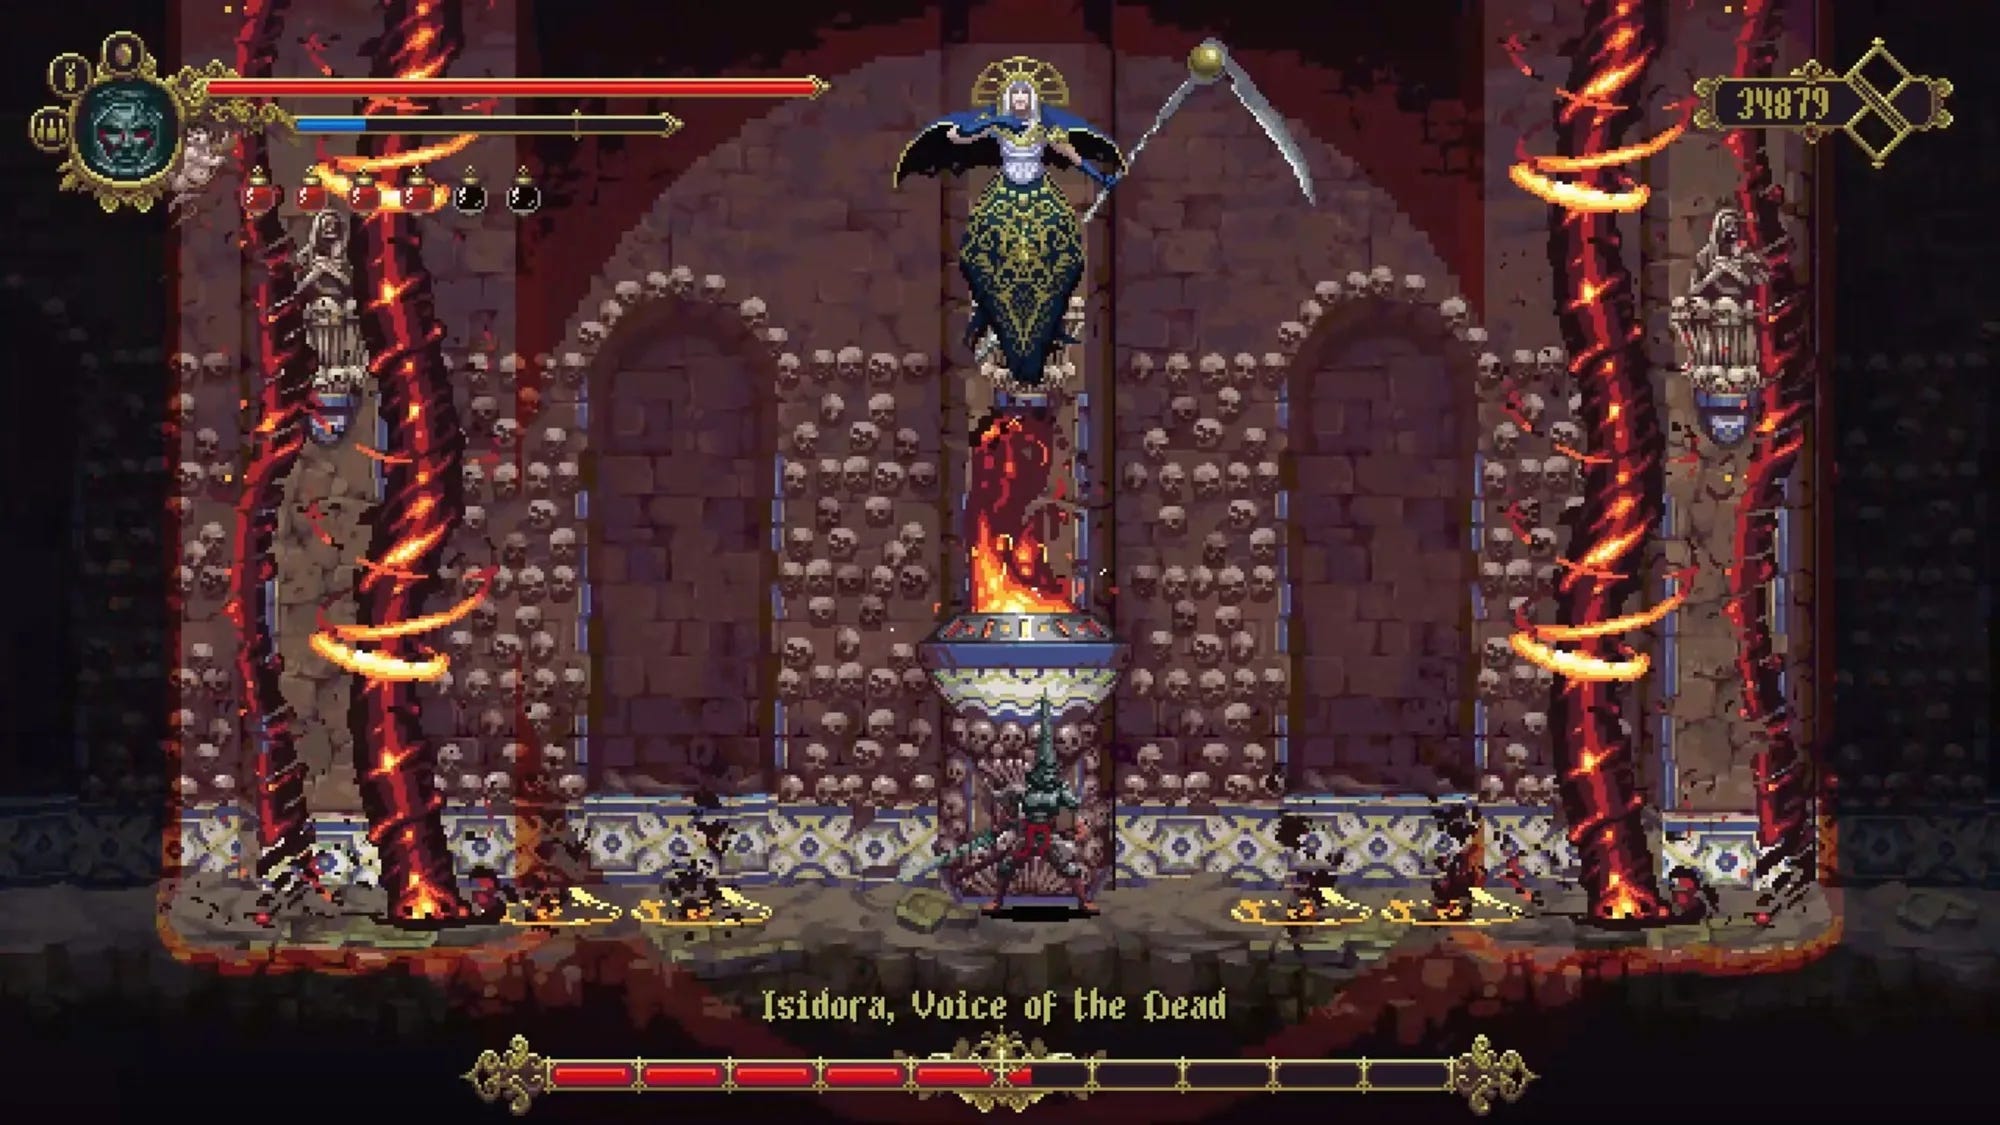 Hey Castlevania Fans, excited to share publisher Merge Games and